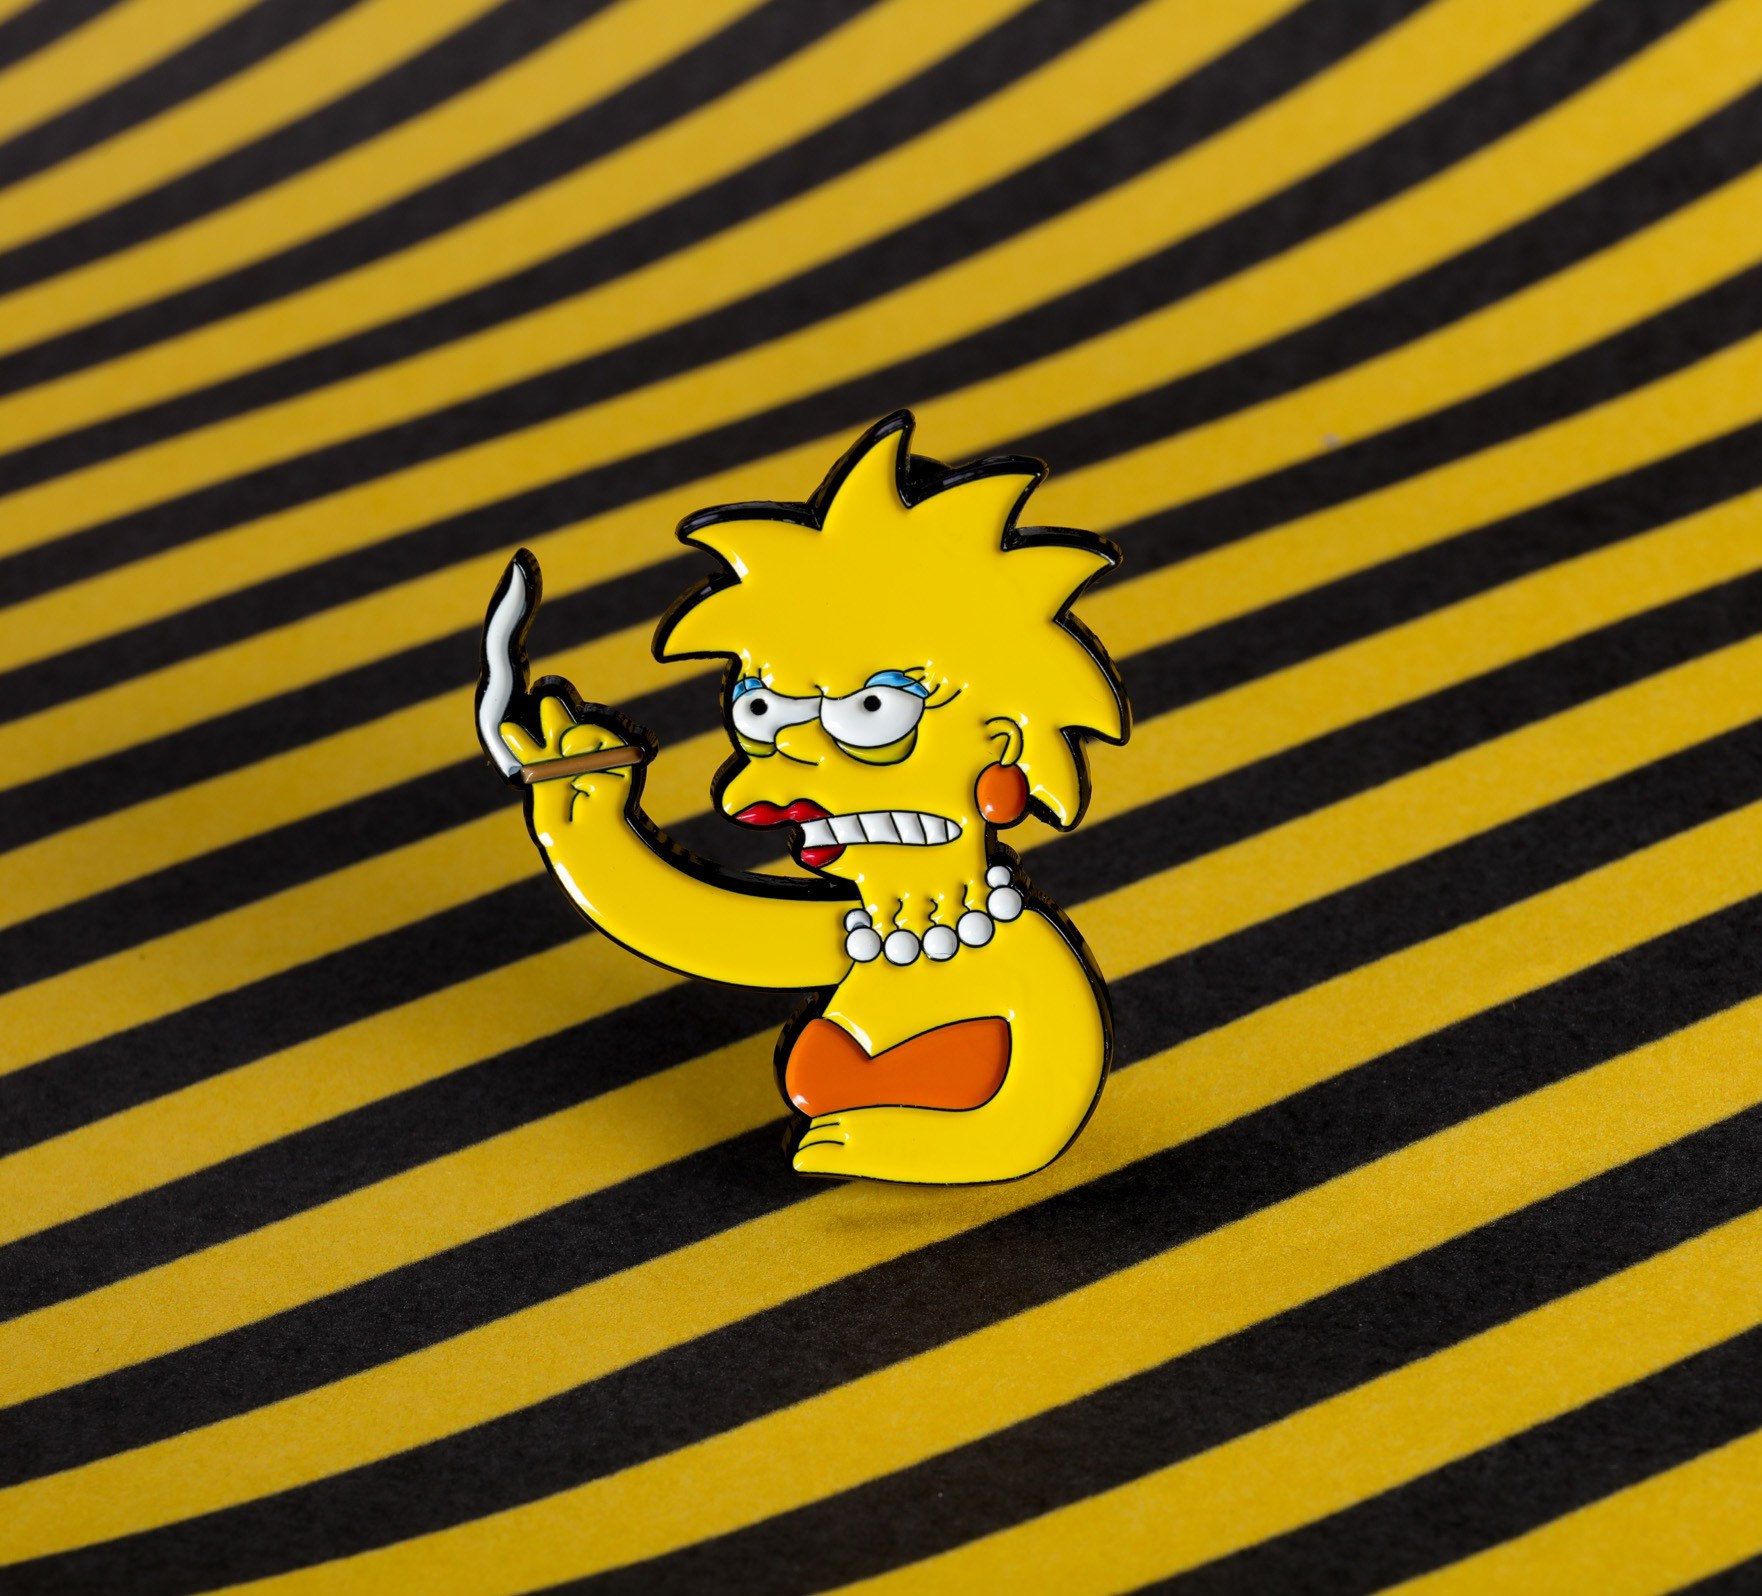 Enamel pin of Marge Simpson holding a knife and a cigarette - Lisa Simpson